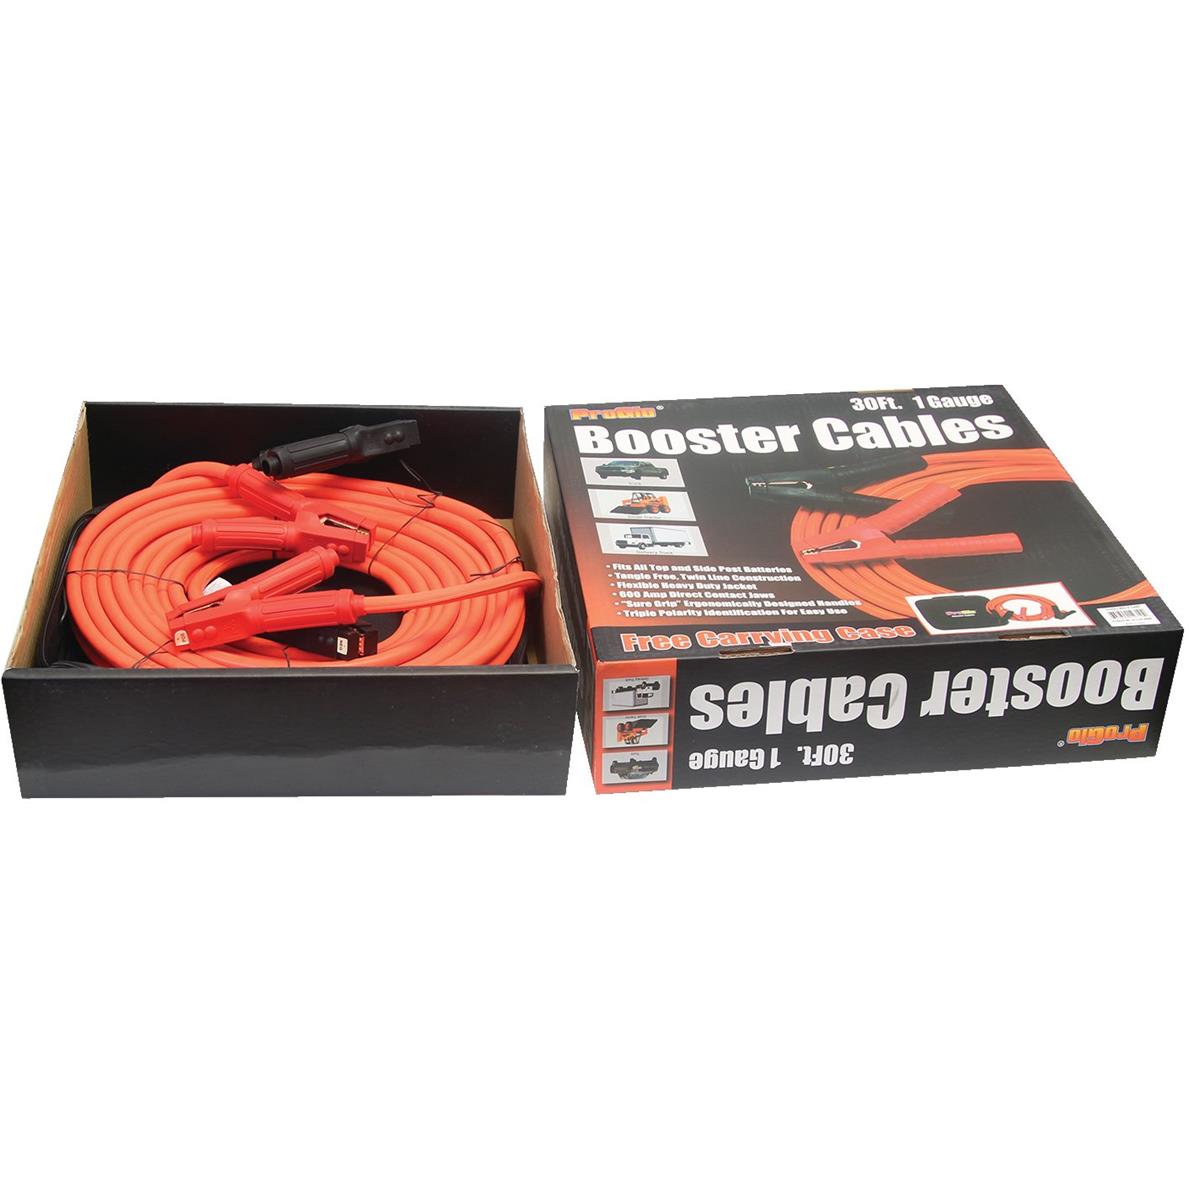 Century Pro Glo 1 Gauge 30' Booster Cables, D1110130OR